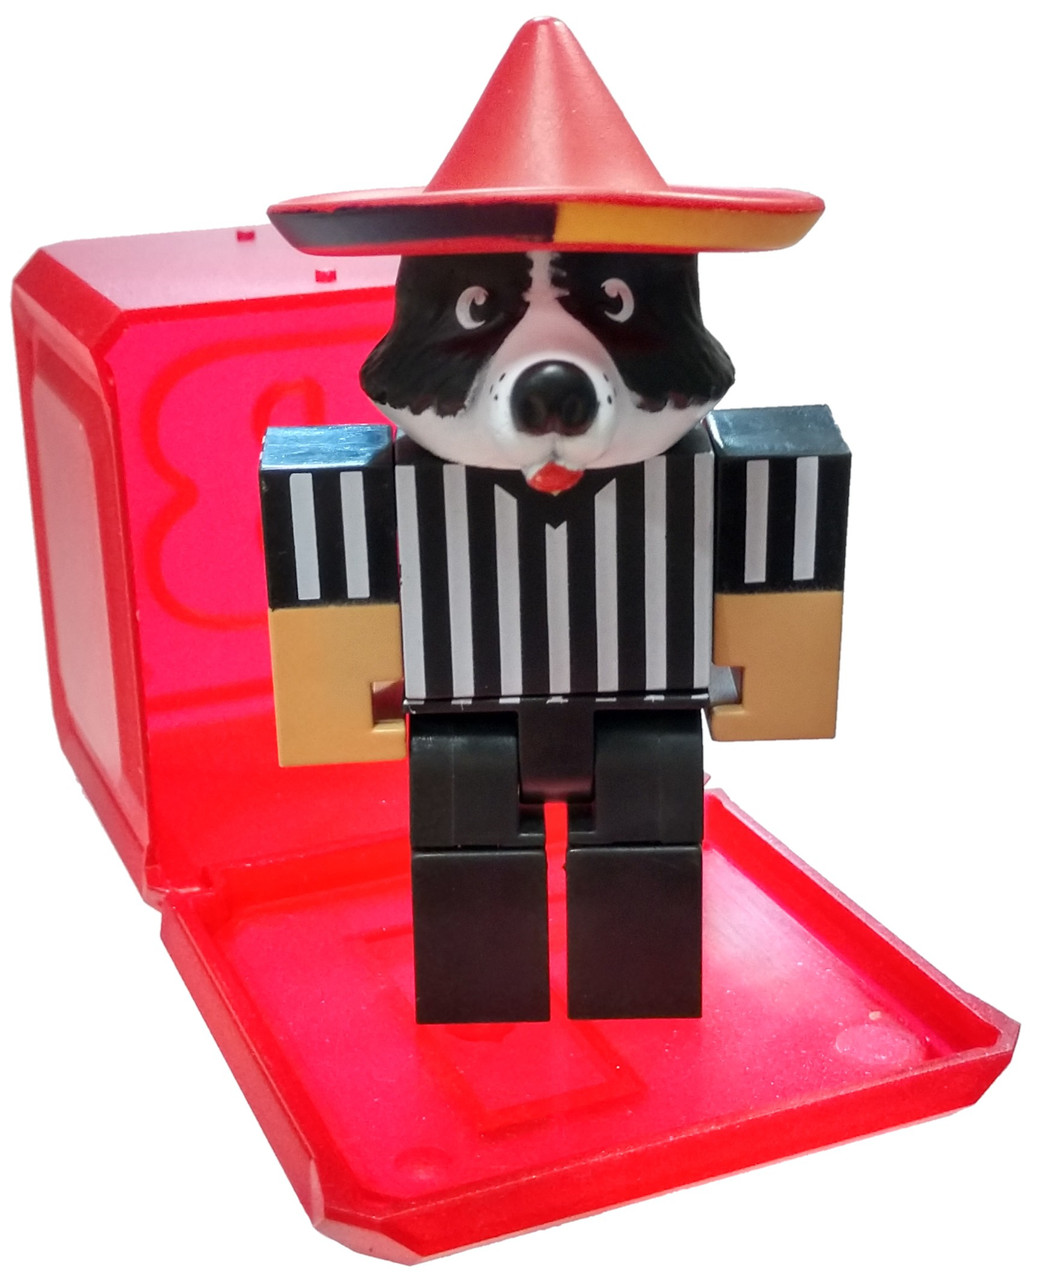 Roblox Celebrity Collection Series 5 High School Life Referee 3 Mini Figure With Red Cube And Online Code Loose Jazwares Toywiz - 5 new codes ninja assassin 2 roblox